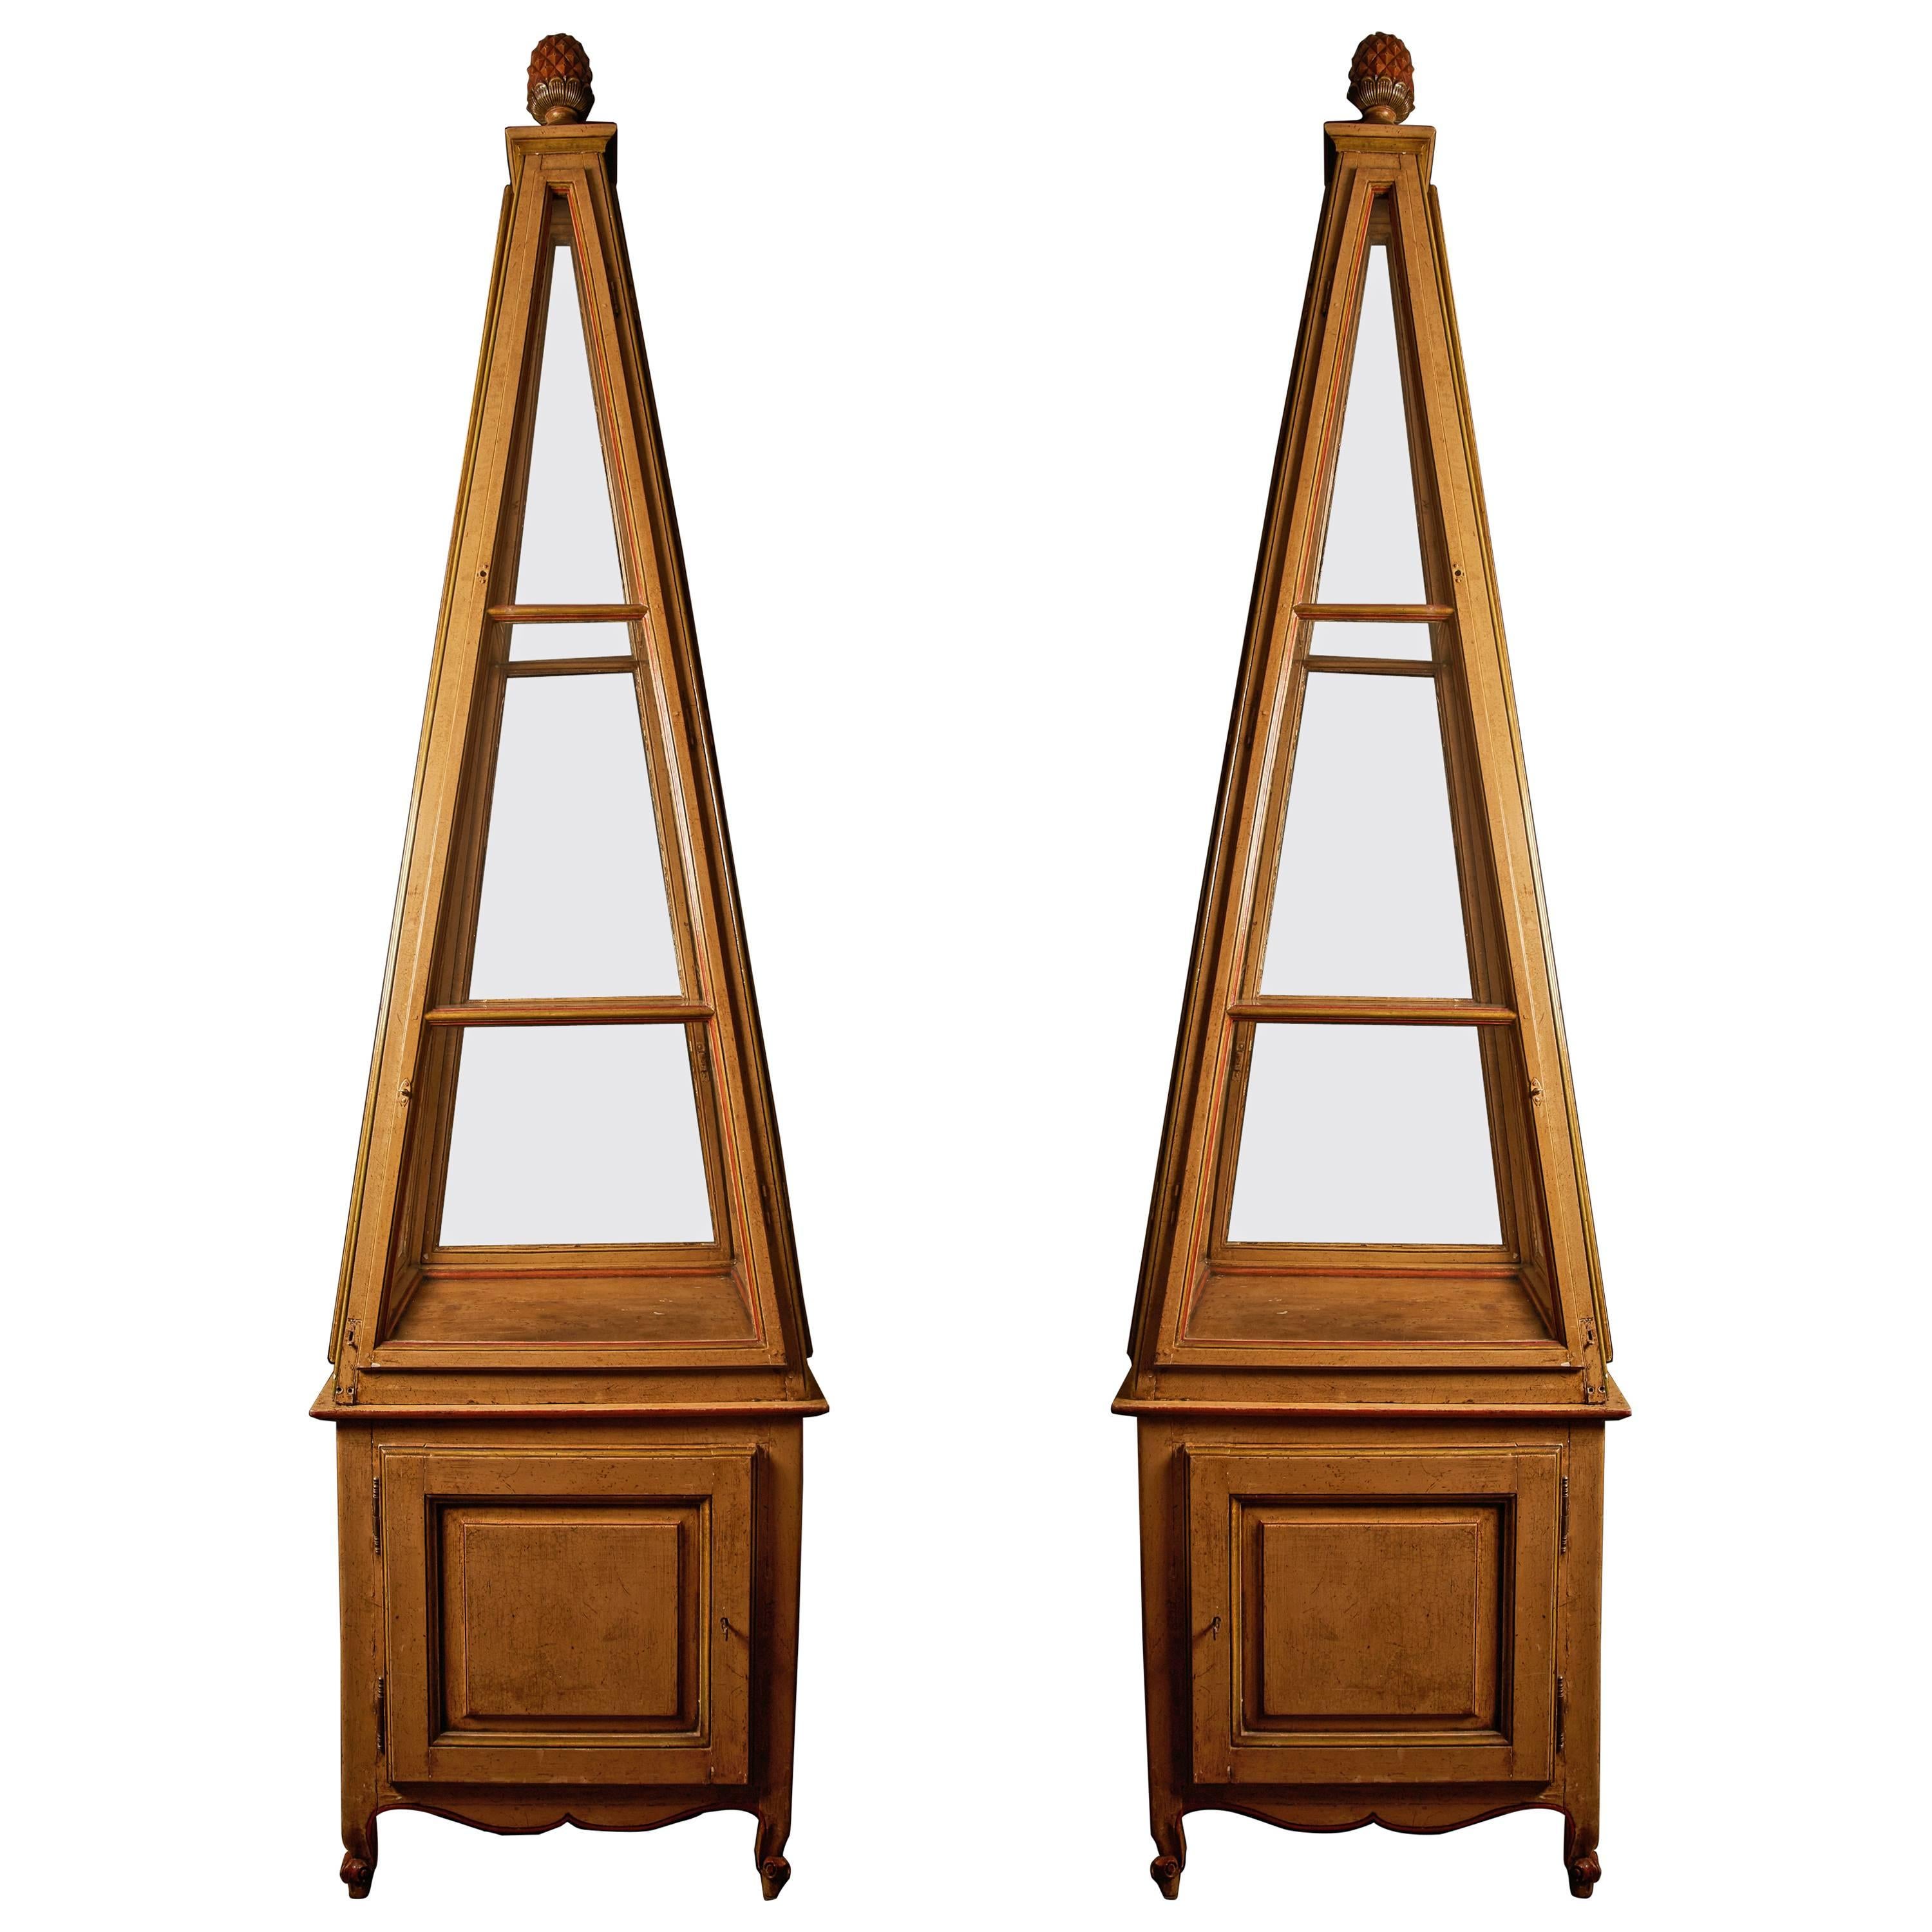 A pair of Belle Epoque polychrome-painted obelisk display vitrines, circa 1900